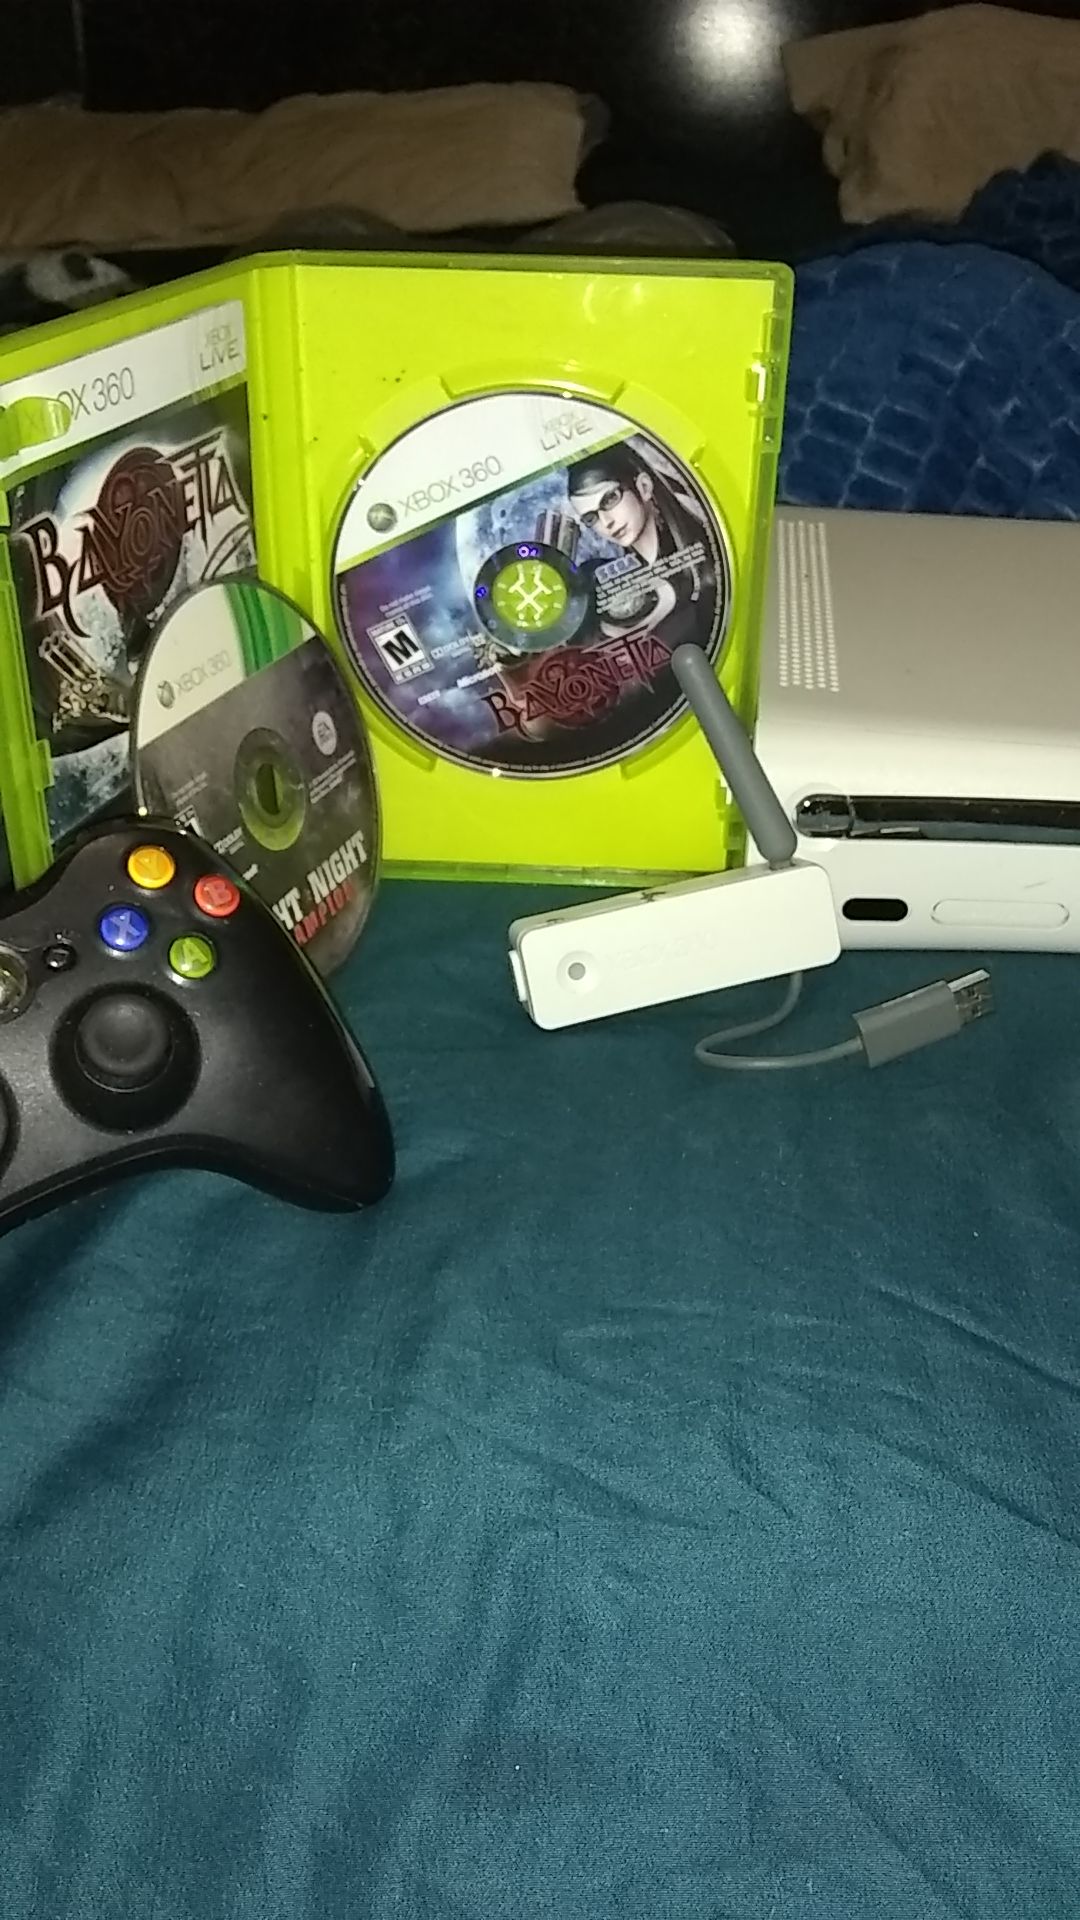 Xbox 360 with network adapter one wireless remote control and 2 video games